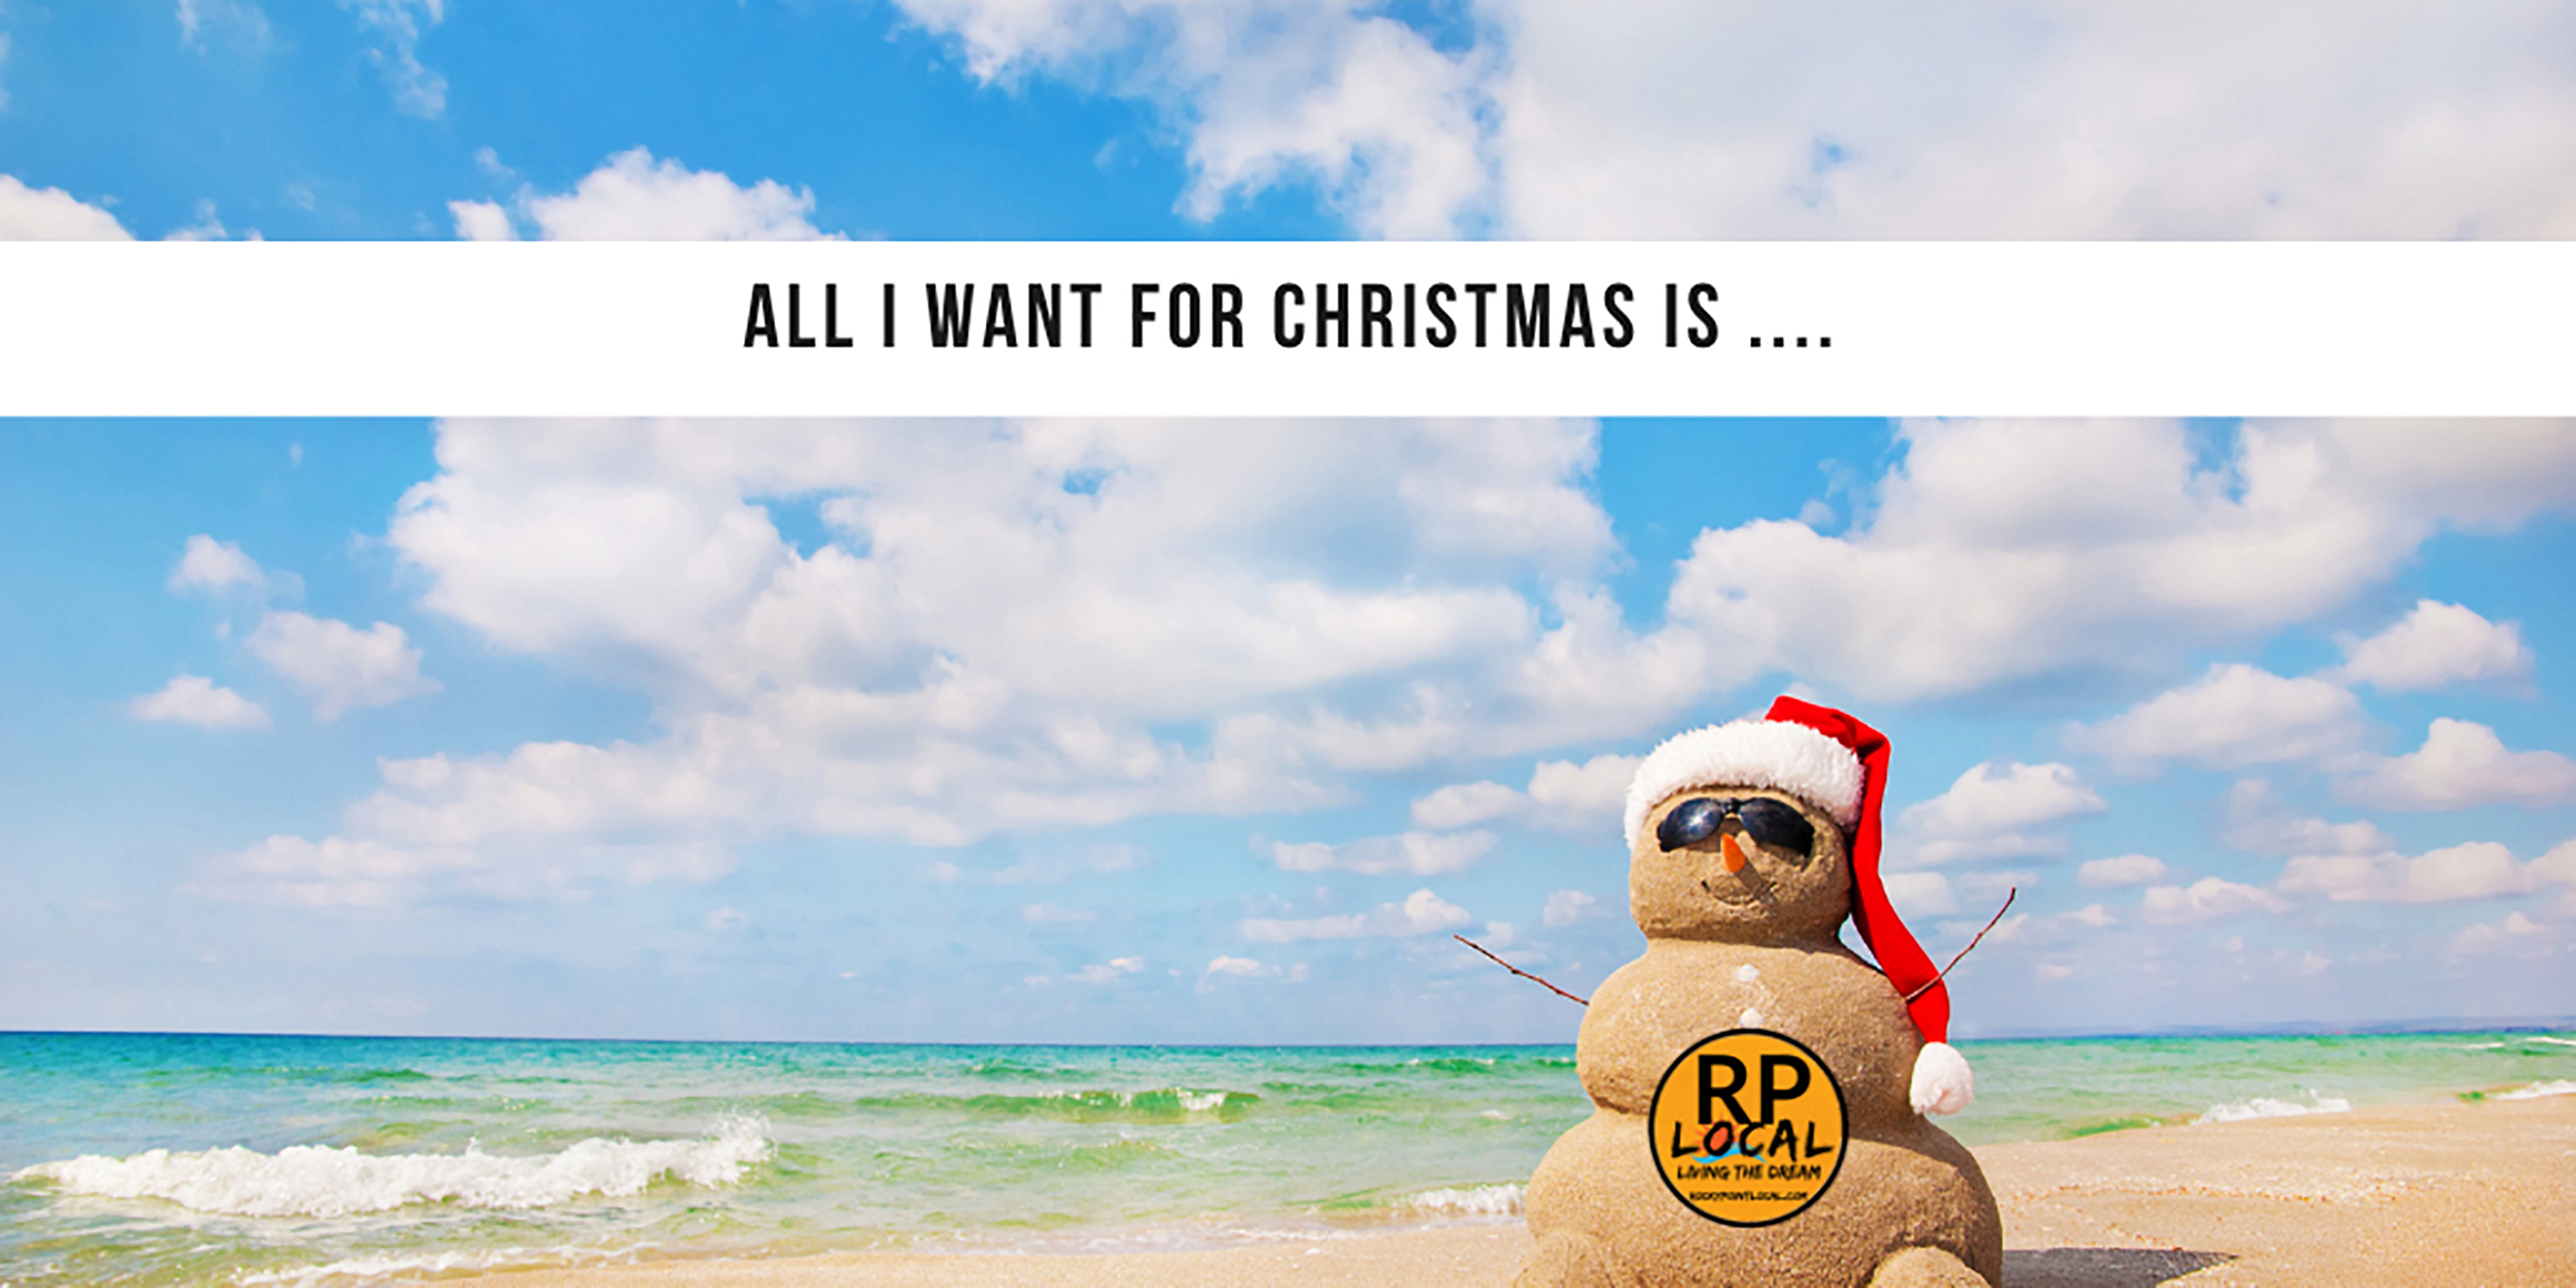 All I want for Christmas is…